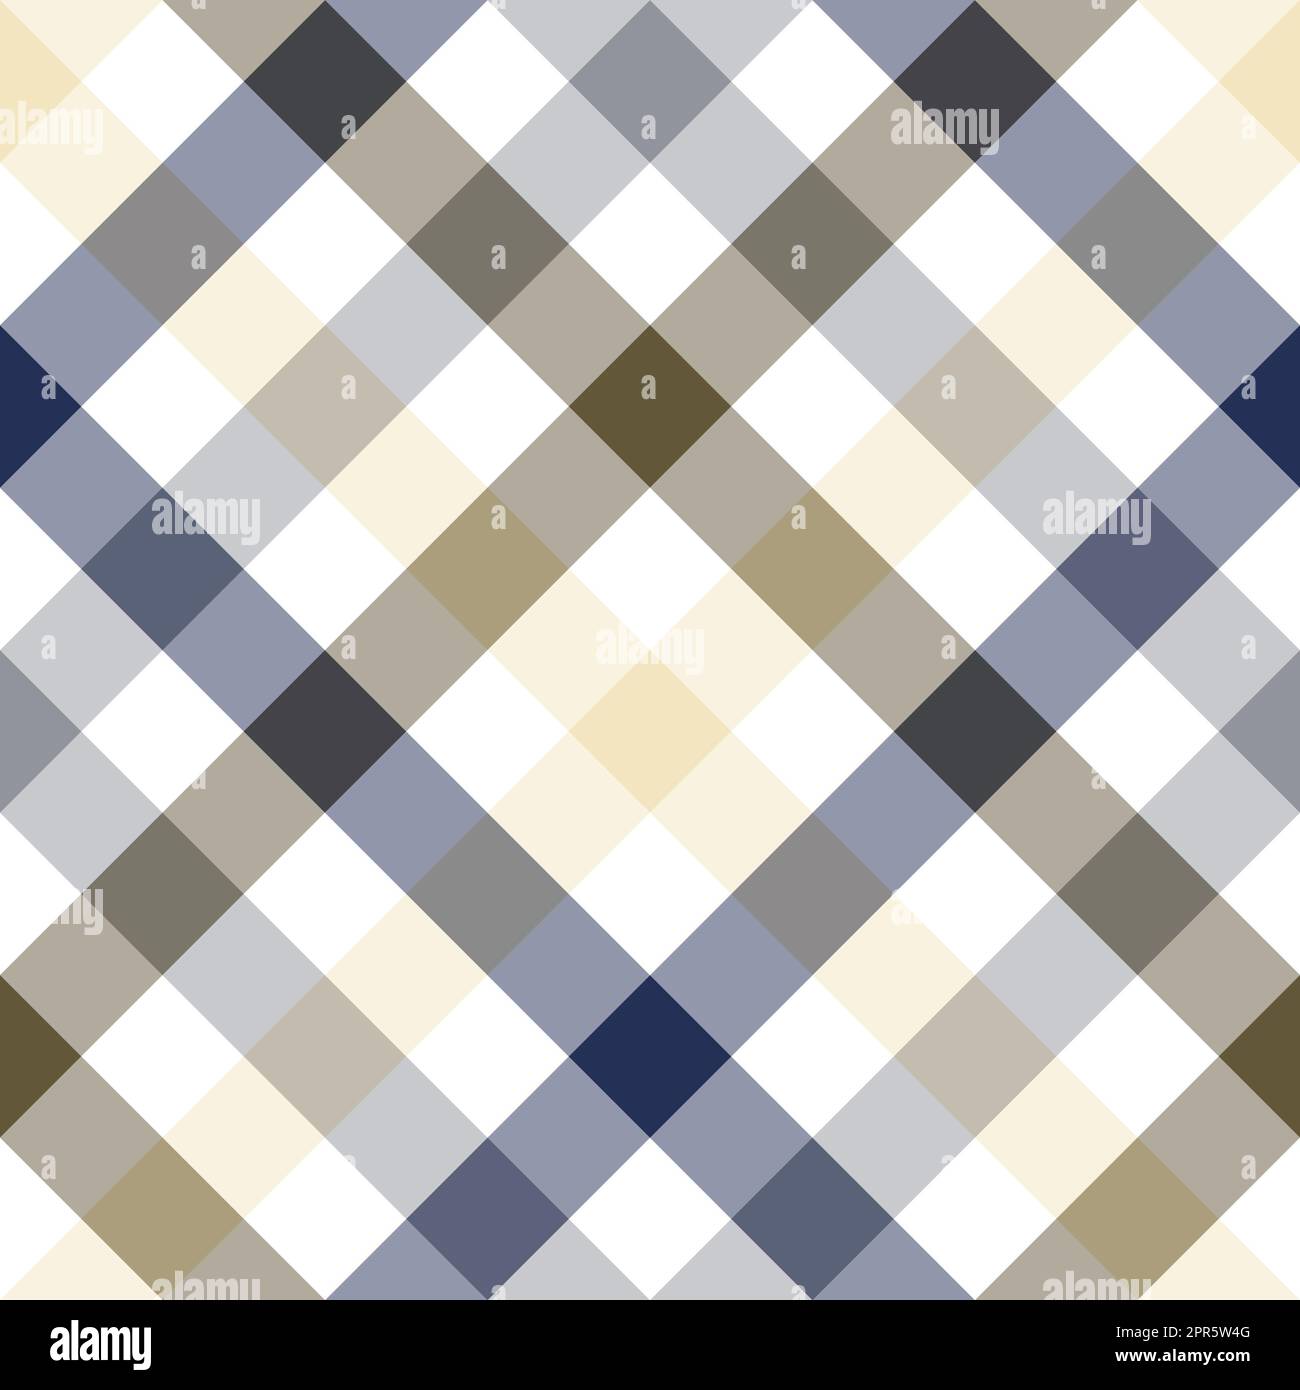 Seamless pattern. Classical cell diagonally. Contrasting cream, blue, gray and olive green color on a white background. Stock Photo